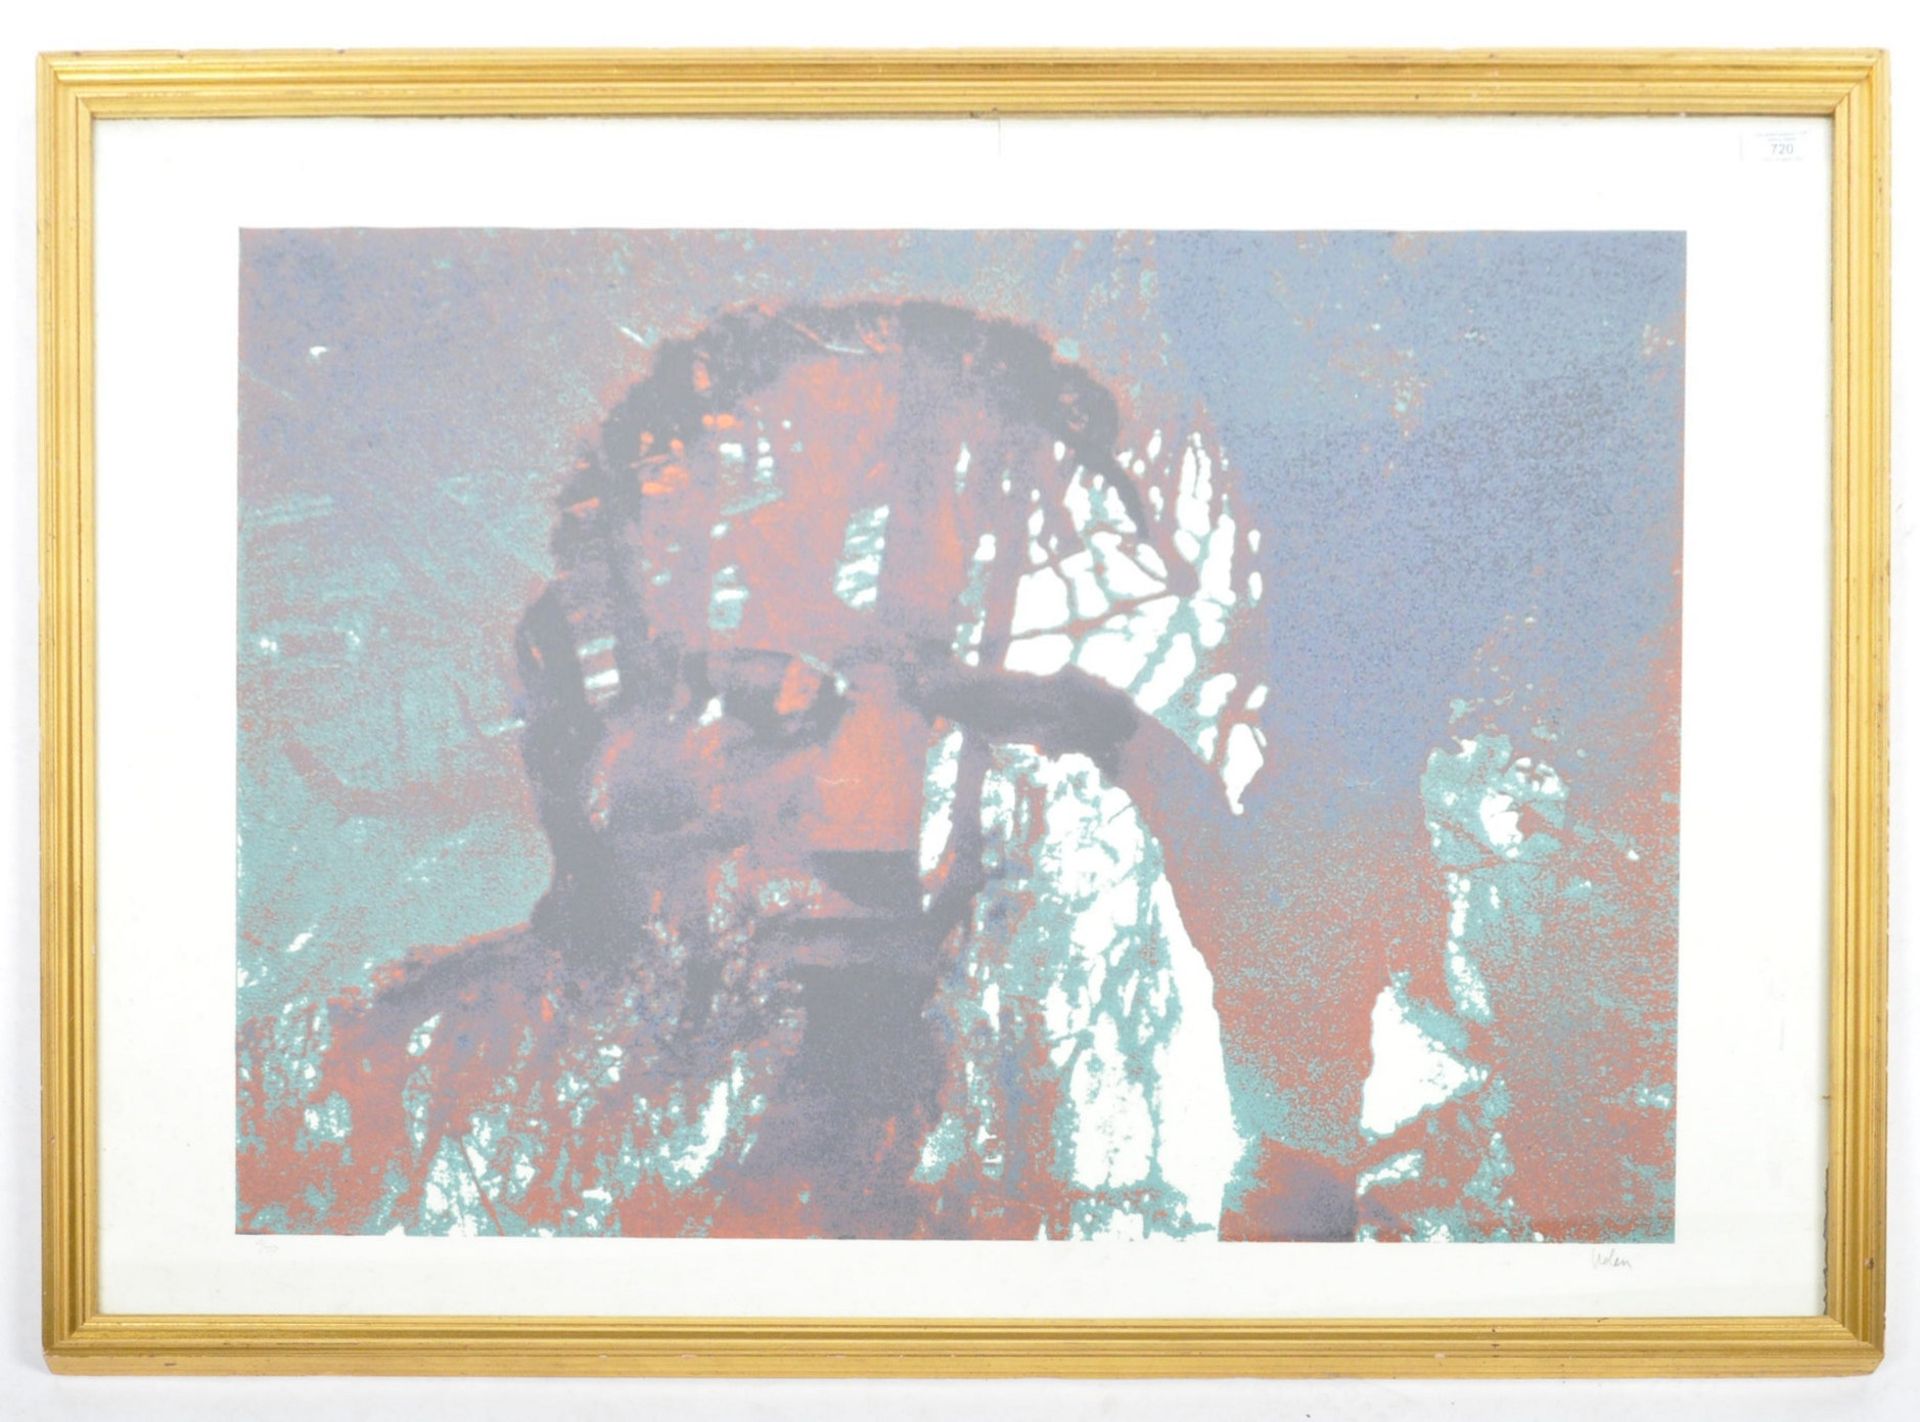 SIR SIDNEY NOLAN - NED KELLY - LIMITED EDITION SCREEN PRINT - Image 2 of 6